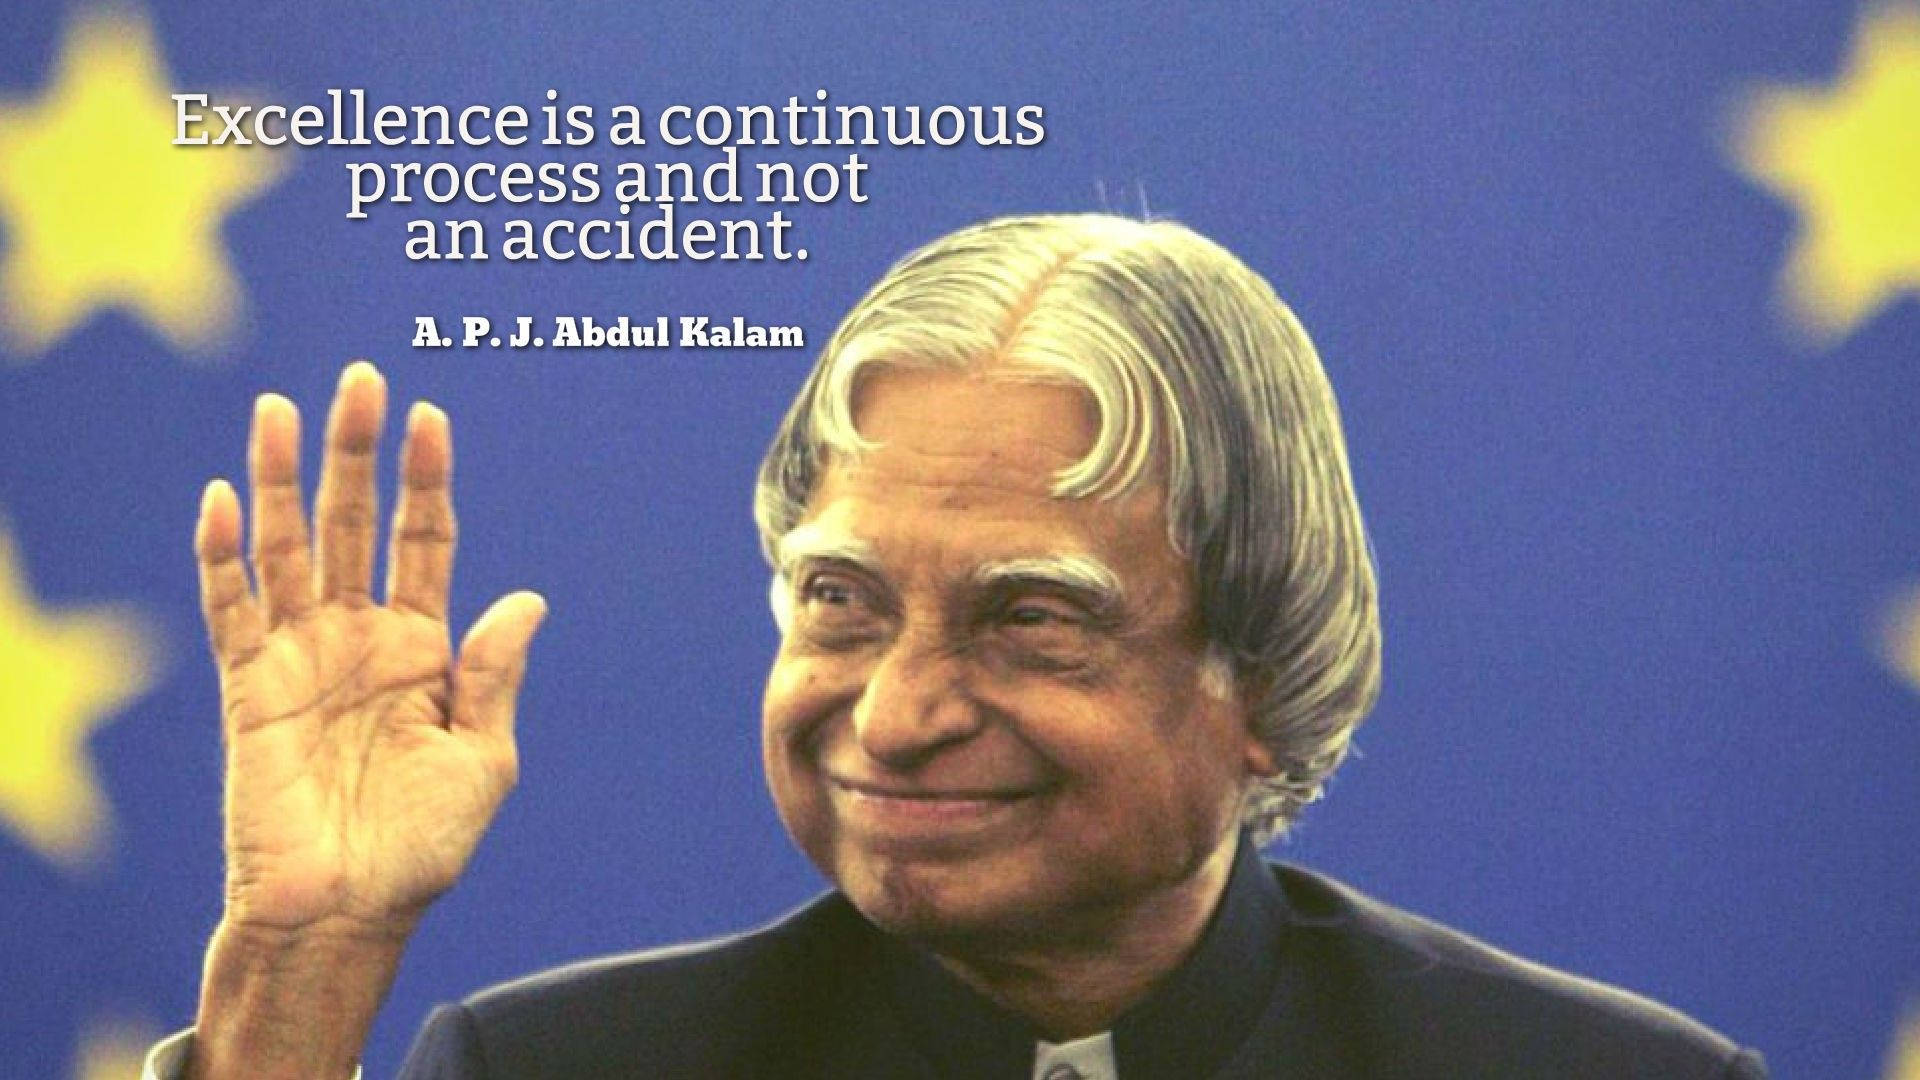 Abdul Kalam Hd Excellence Quote Wallpaper